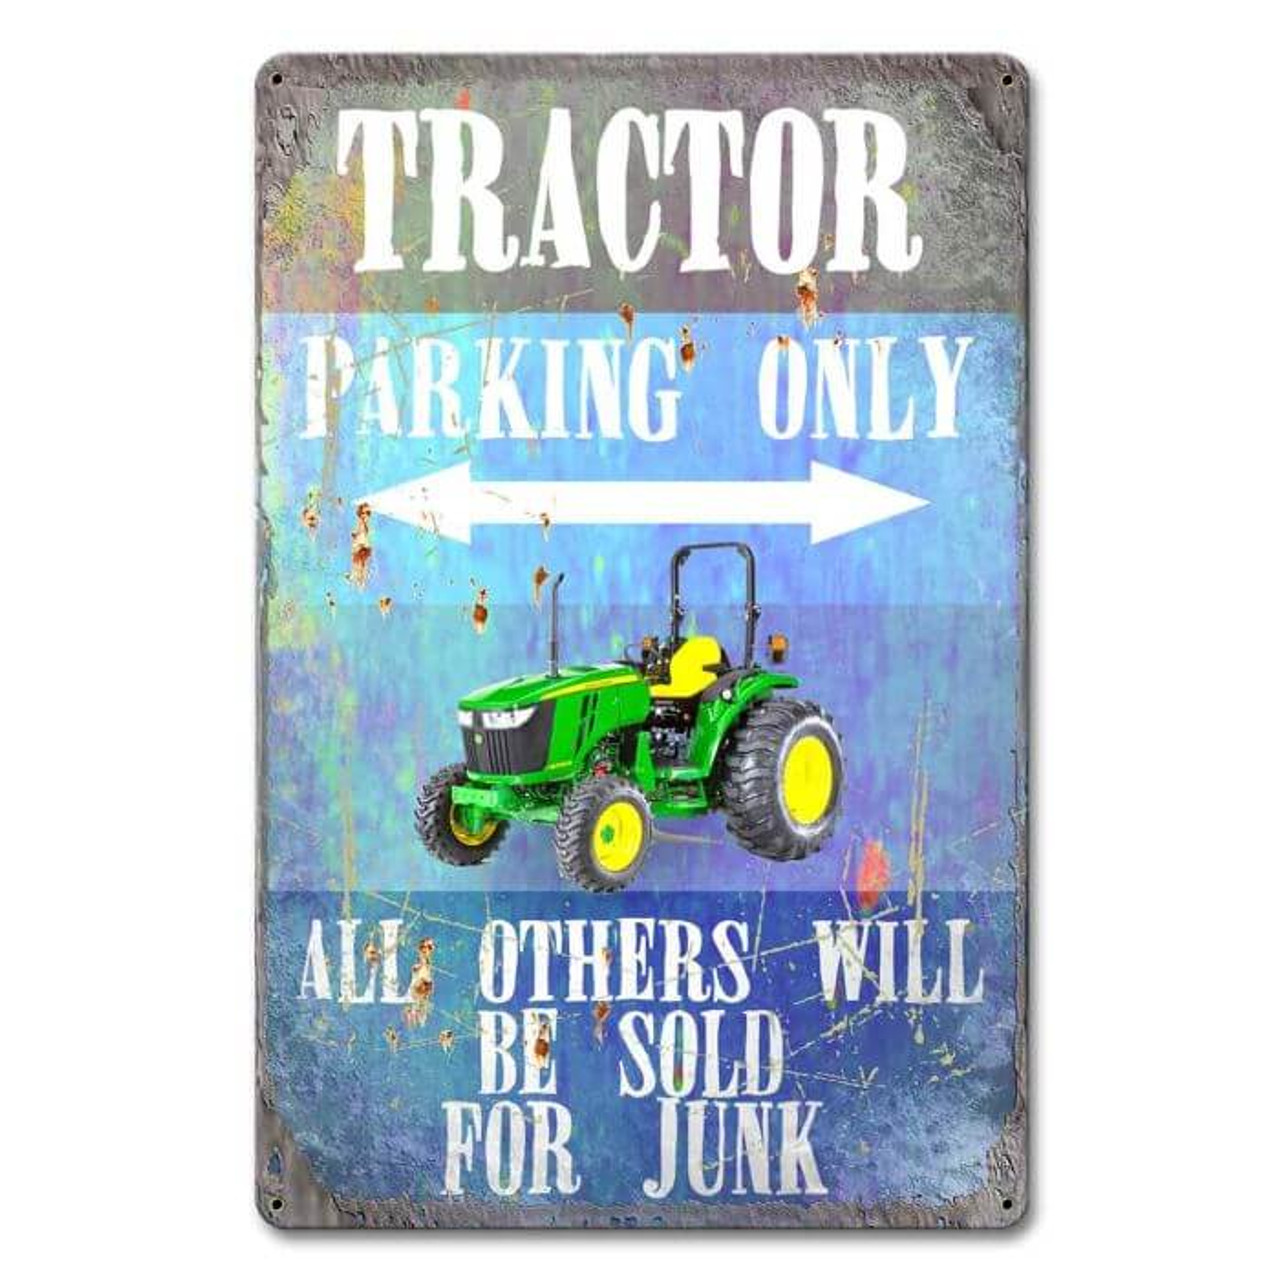 Tractor Parking Only Metal Sign 12 x 18 Inches